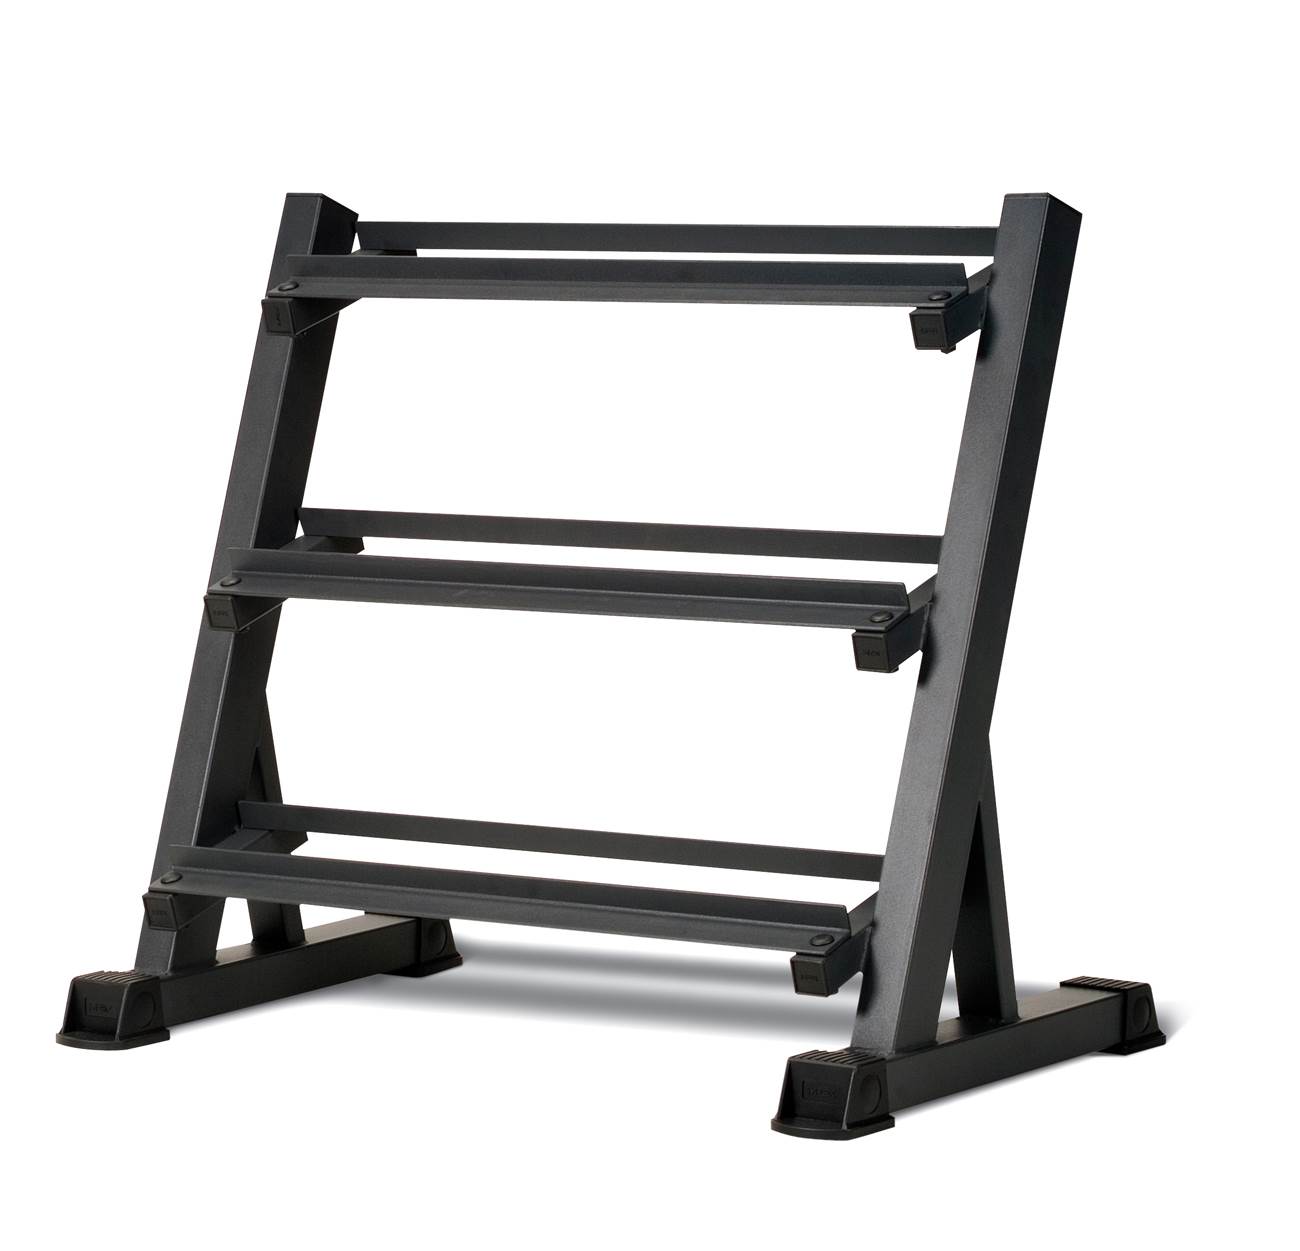 Marcy Apex 3-Tier Dumbbell Rack: DBR-86 - image 1 of 4